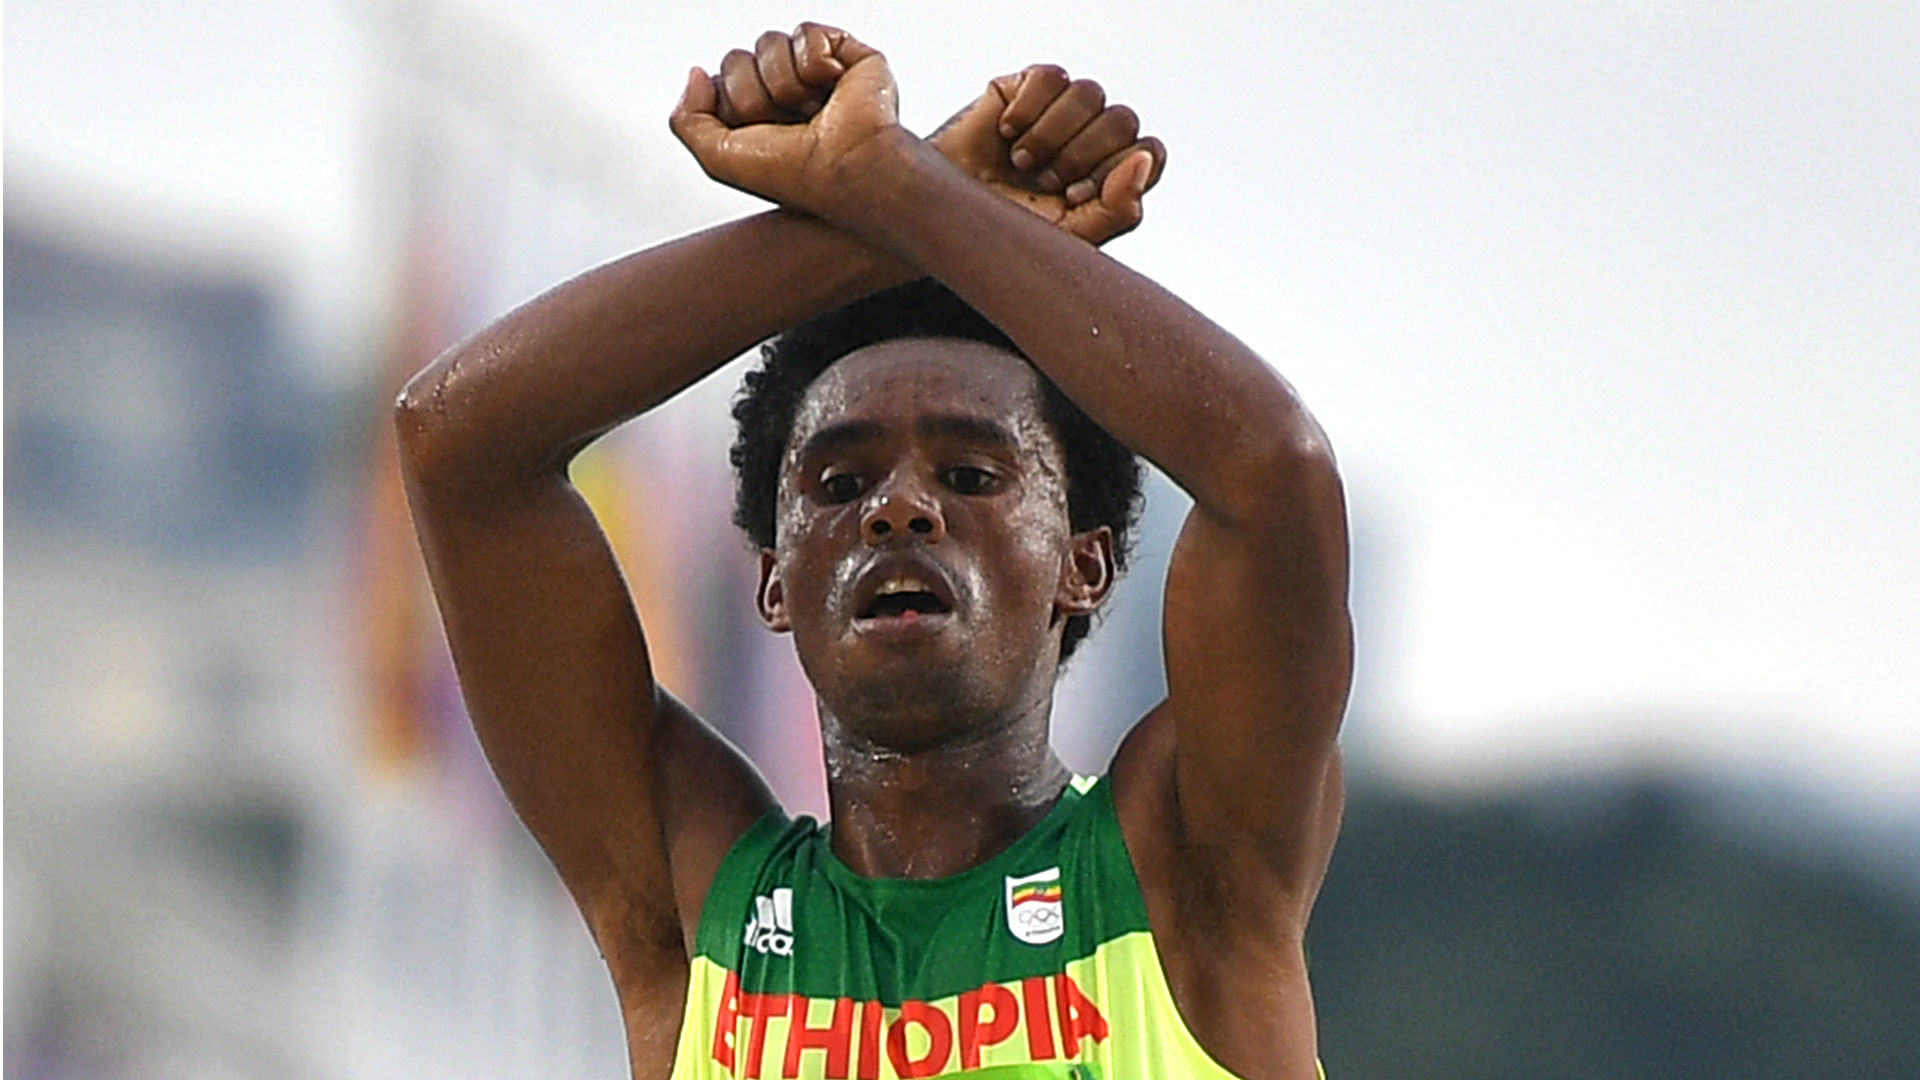 Olympic silver medallist Feyisa Lilesa had been in exile in the US since making this anti-government gesture